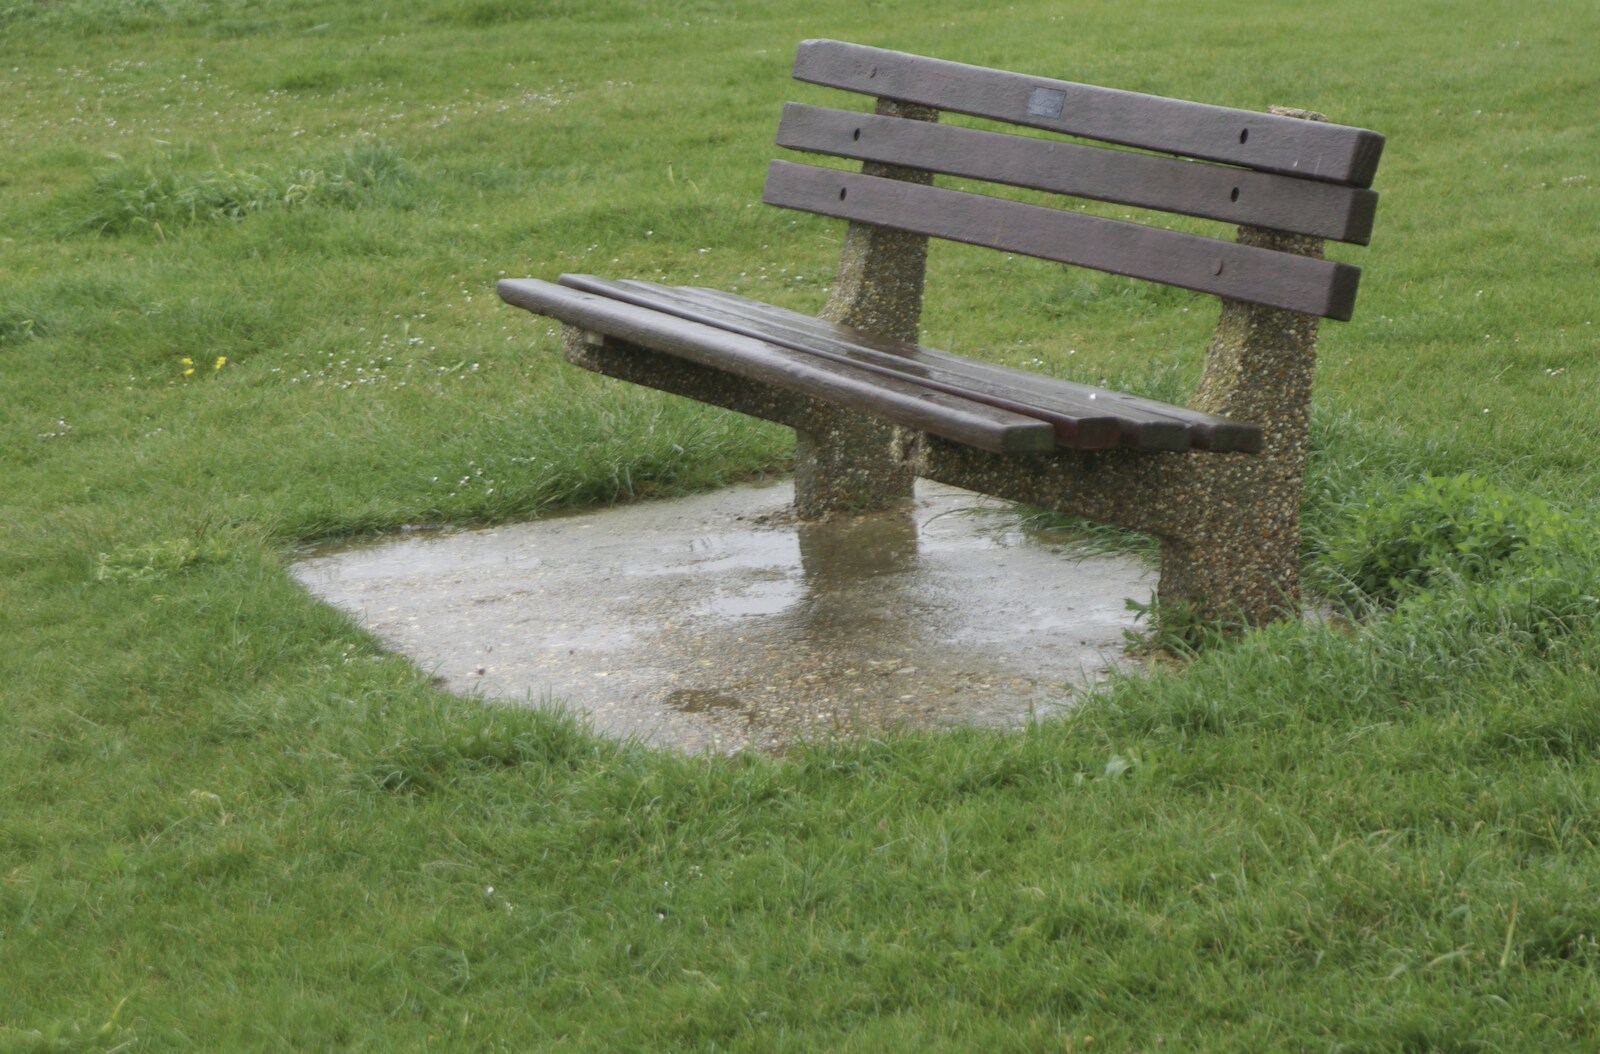 Nosher's Birthday Trip, New Milton, Hampshire - 26th May 2007: A rain-soaked bench sits empty on the clifftop